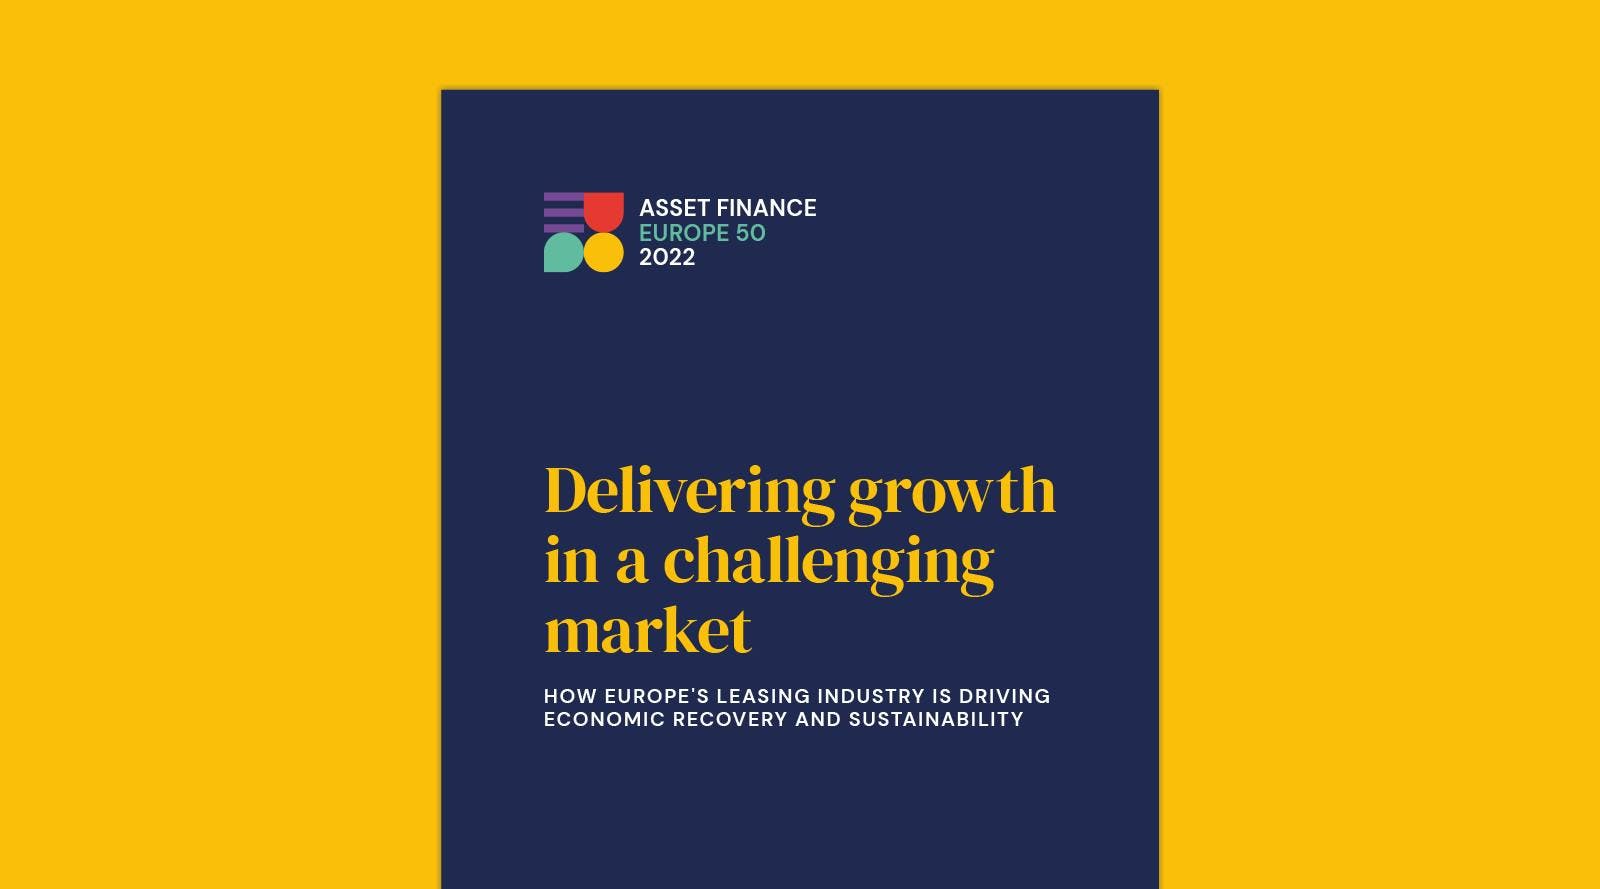 Asset Finance Europe 50 2022: Delivering Growth in a Challenging Market